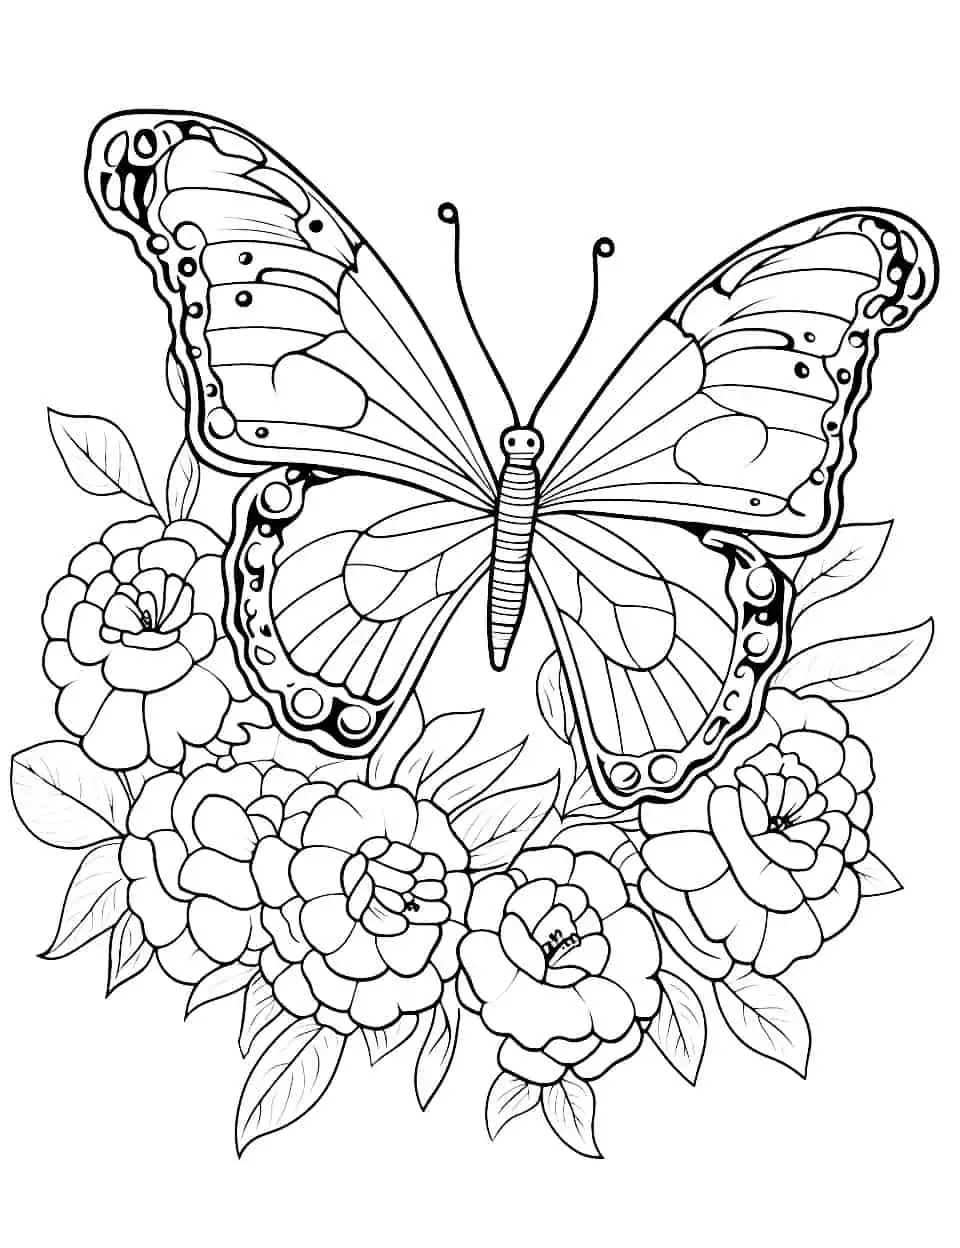 Botanical Beauty Butterfly Coloring Page - A coloring page showcasing butterflies and intricate flower arrangements.